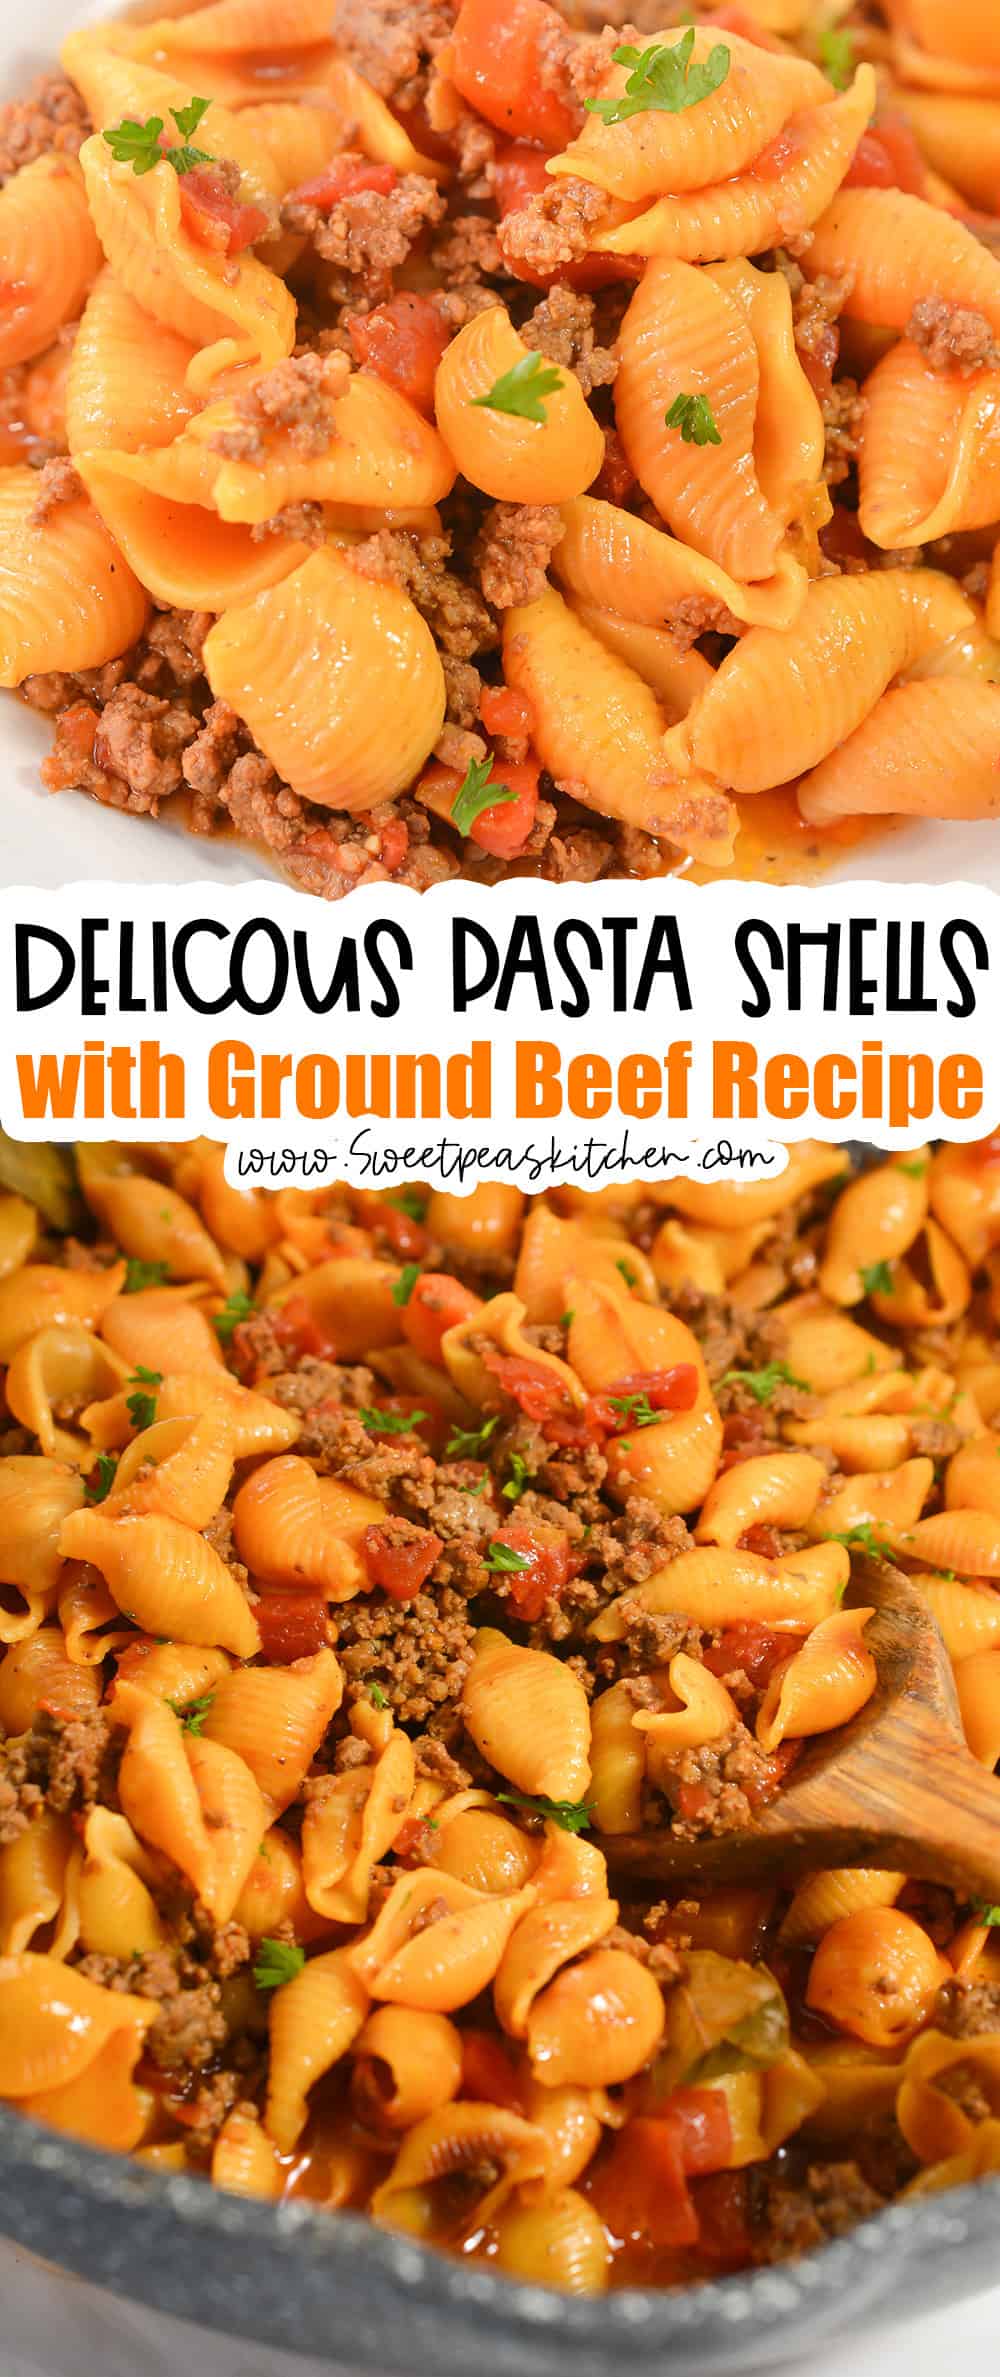 Pasta Shells with Ground Beef on pinterest